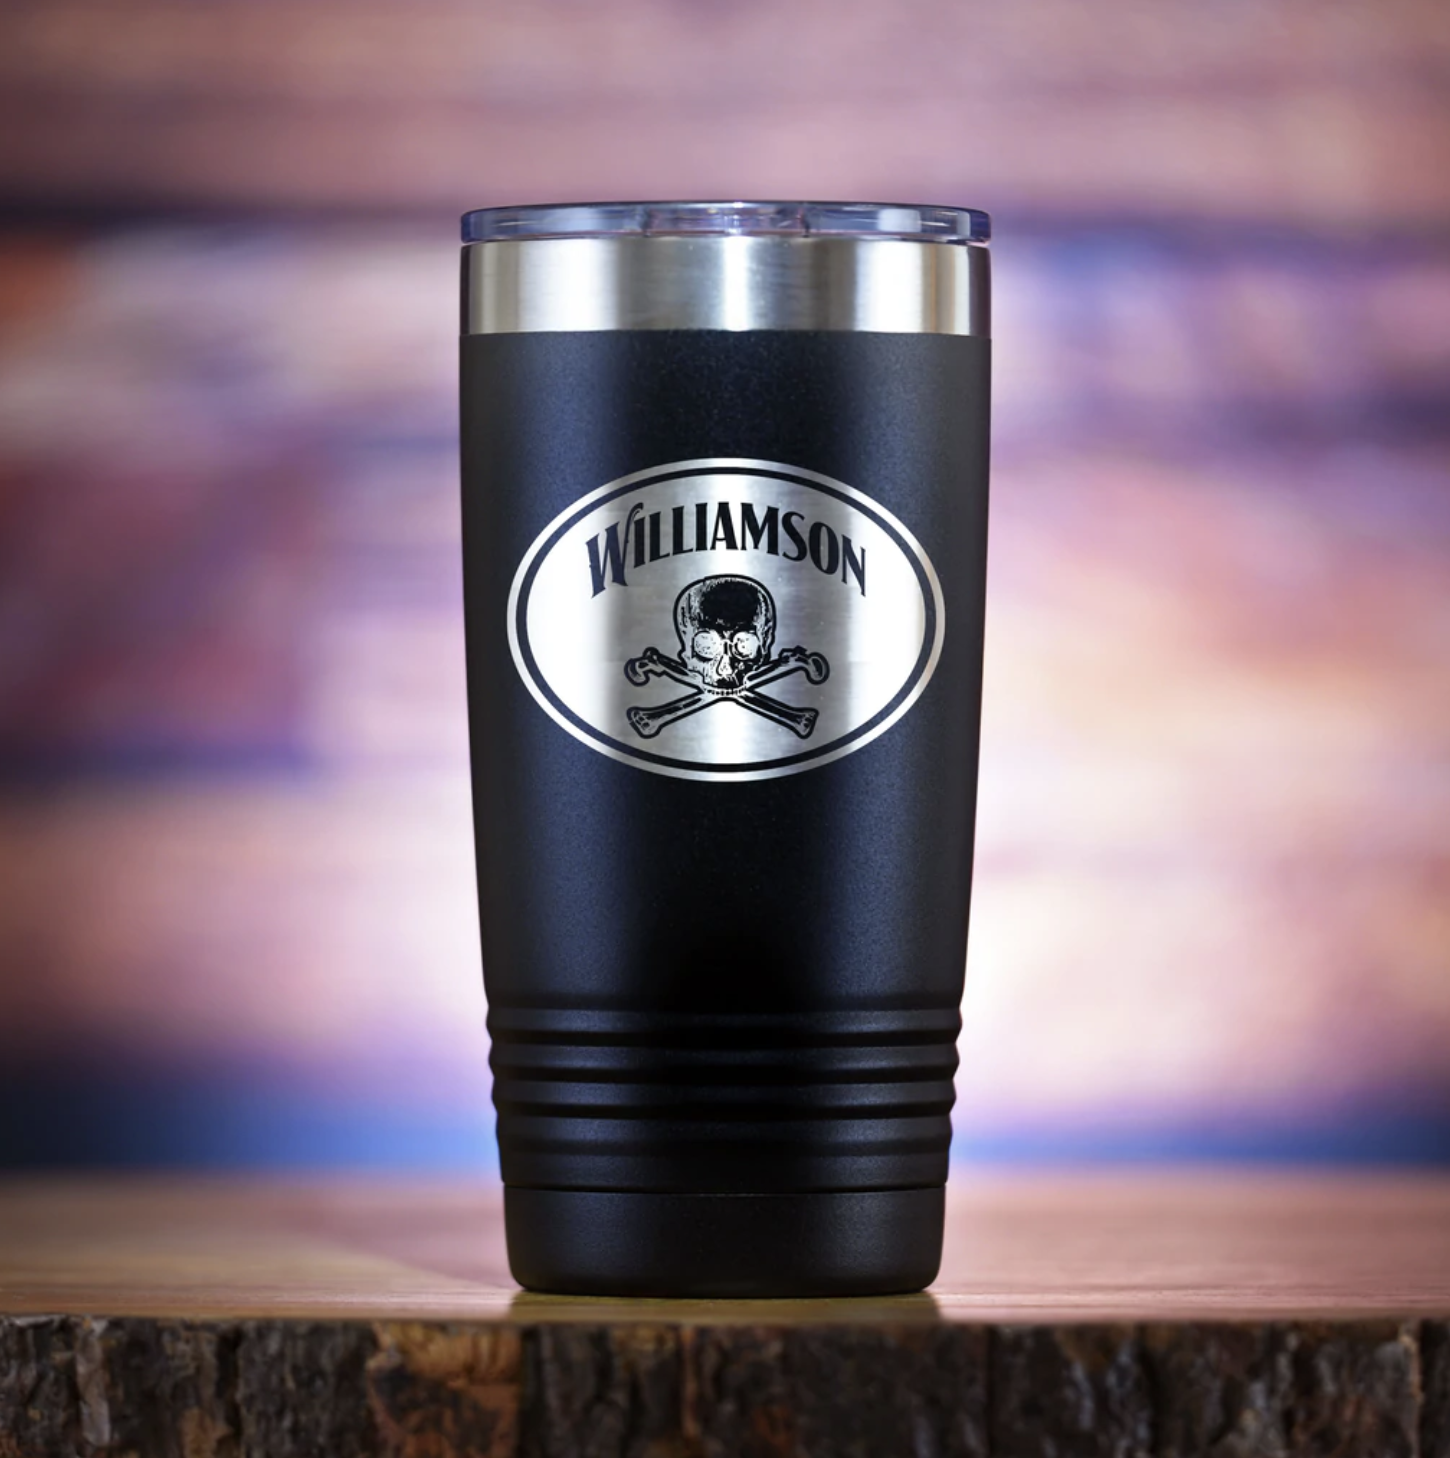 19 Best Personalized Tumblers for Your Men - GroomsDay